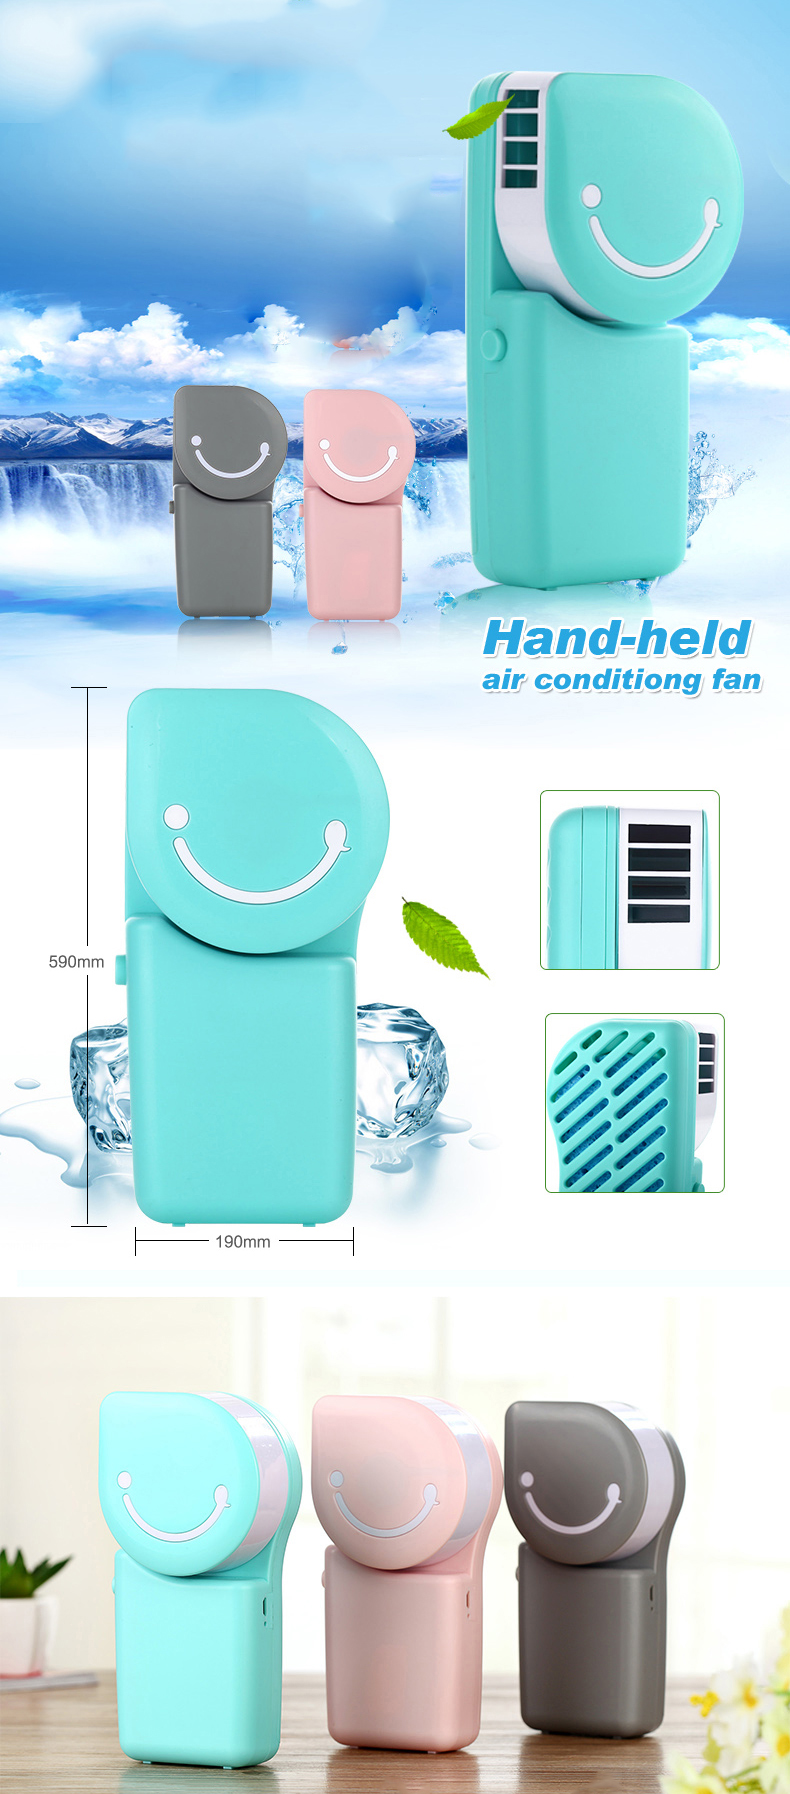 Loskii LX-882 Summer Mini Fan Cooling Portable Air Conditioning USB Charge Hand-held Cool Fan 73